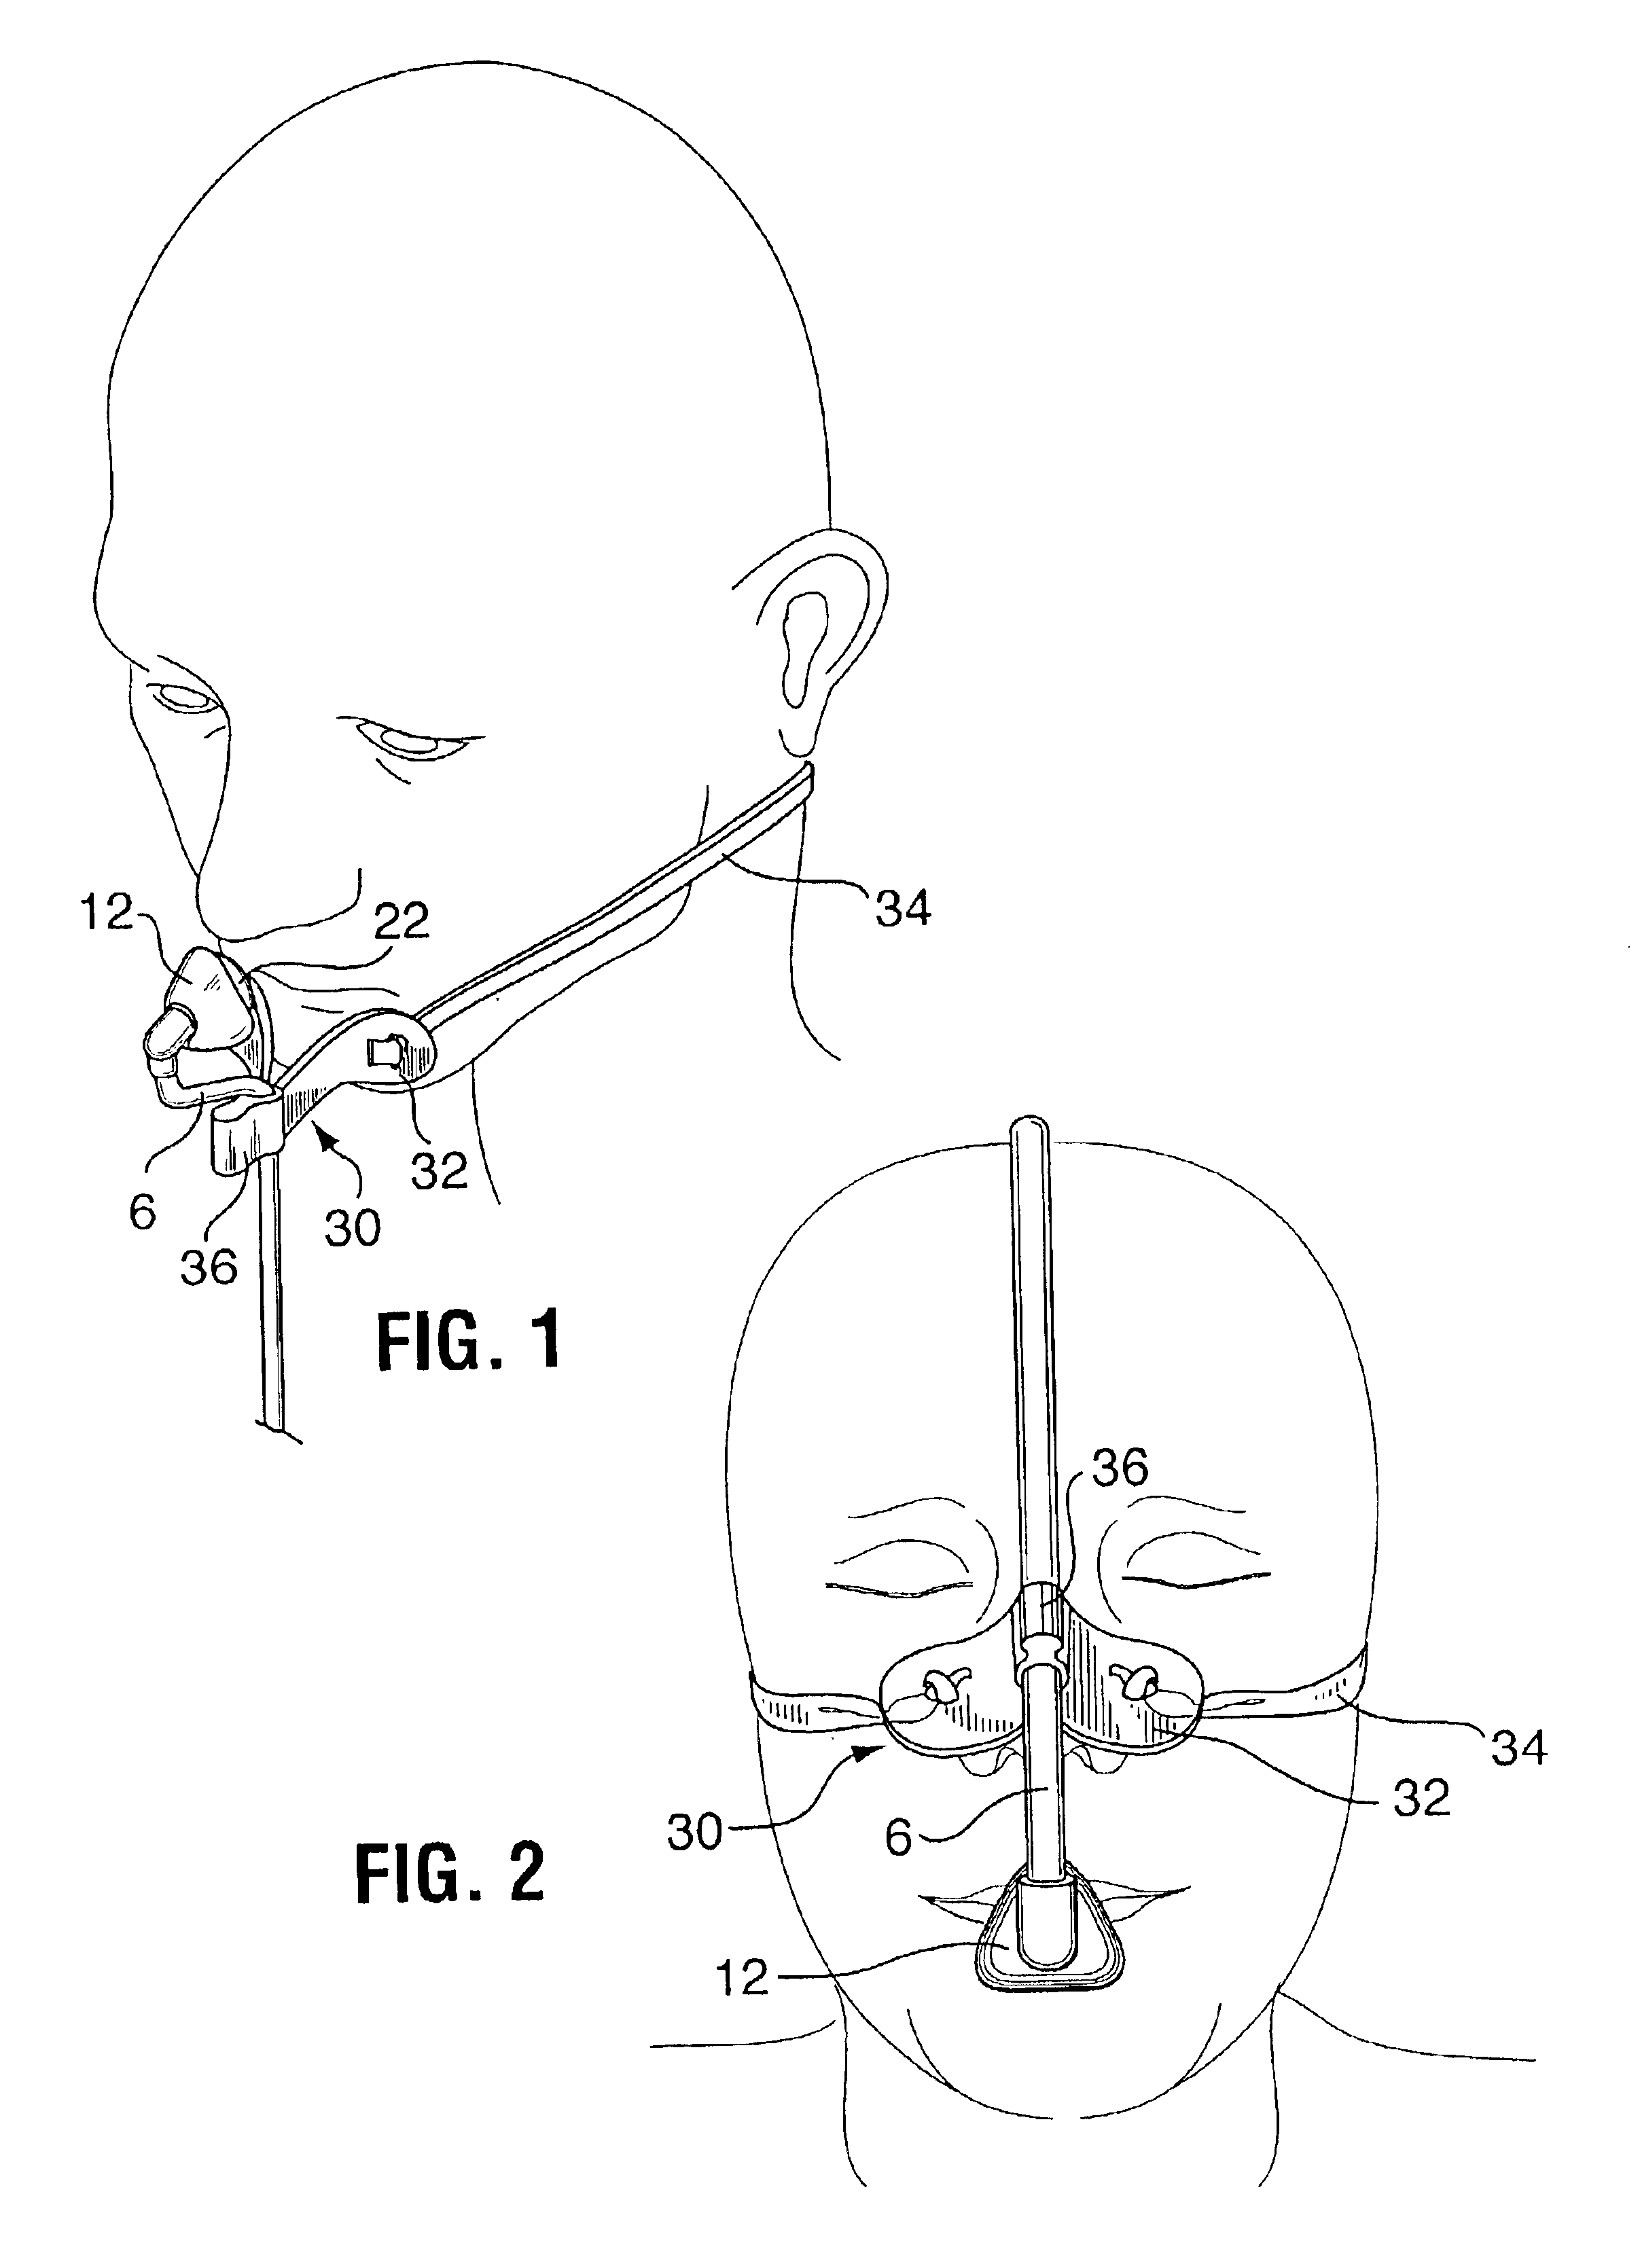 Lightweight oxygen delivery device for patients